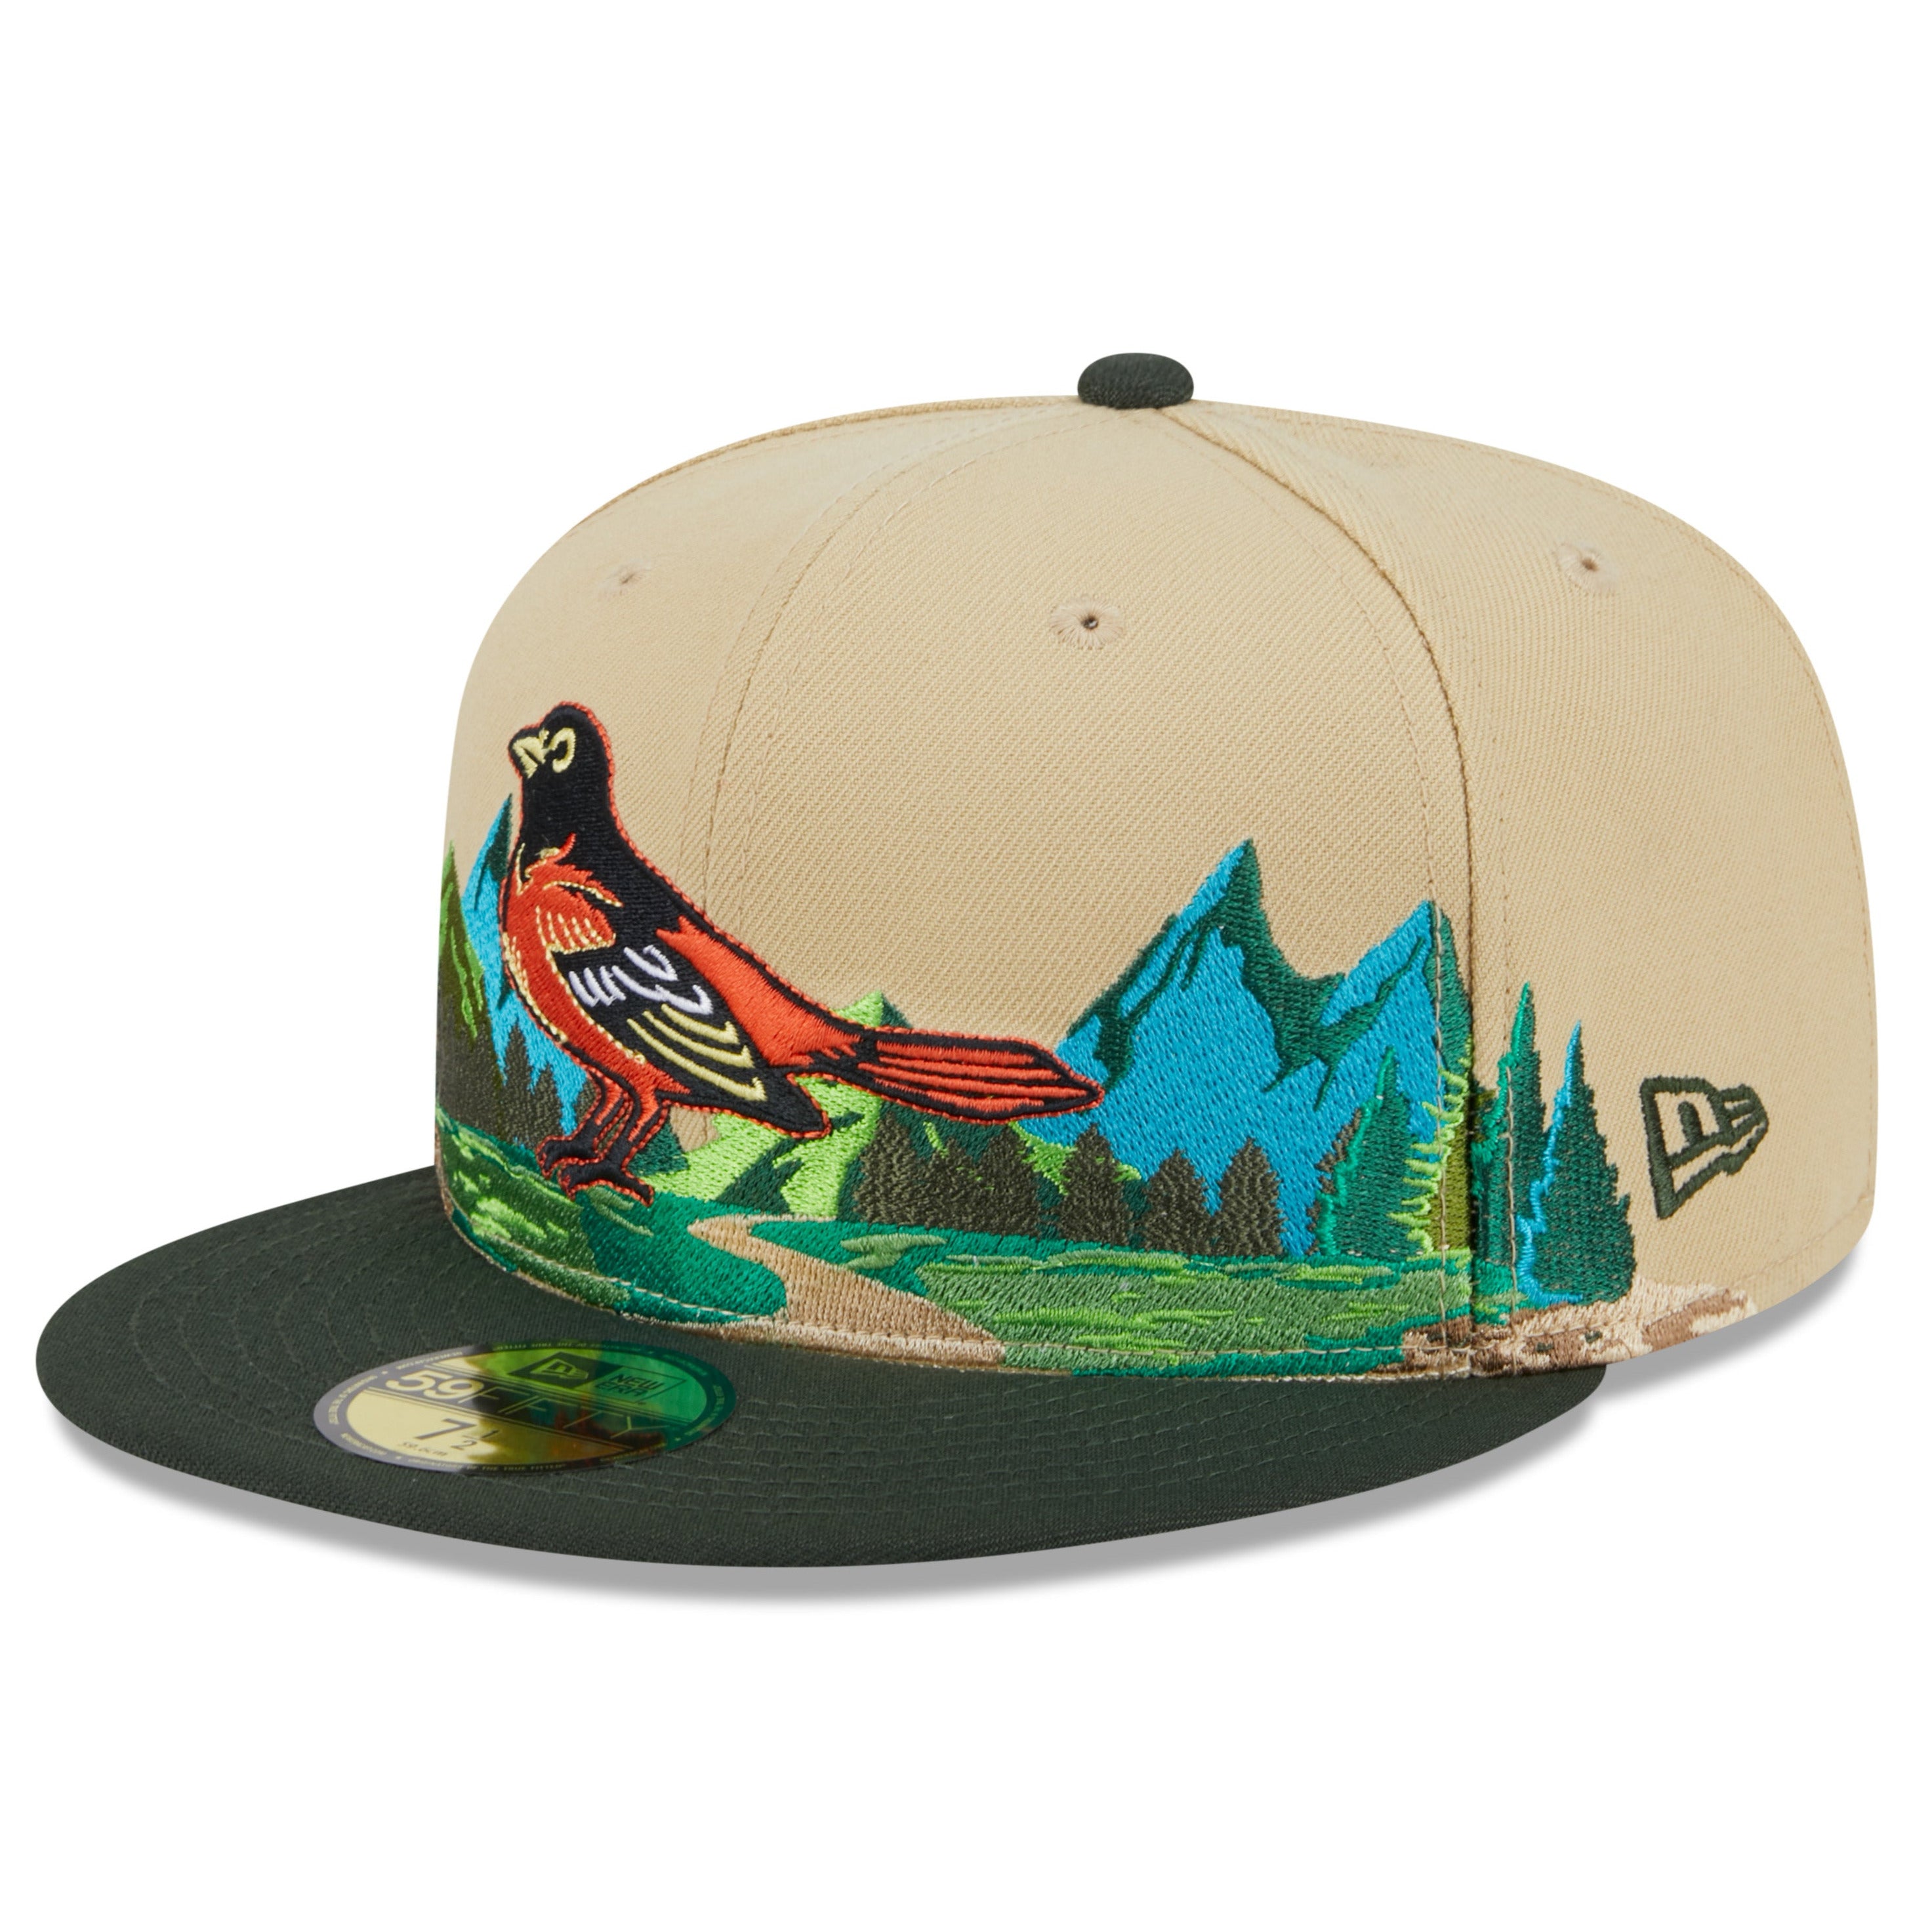 NEW ERA 59FIFTY MLB BALTIMORE ORIOLES TEAM LANDSCAPE TWO TONE / GREY UV FITTED CAP